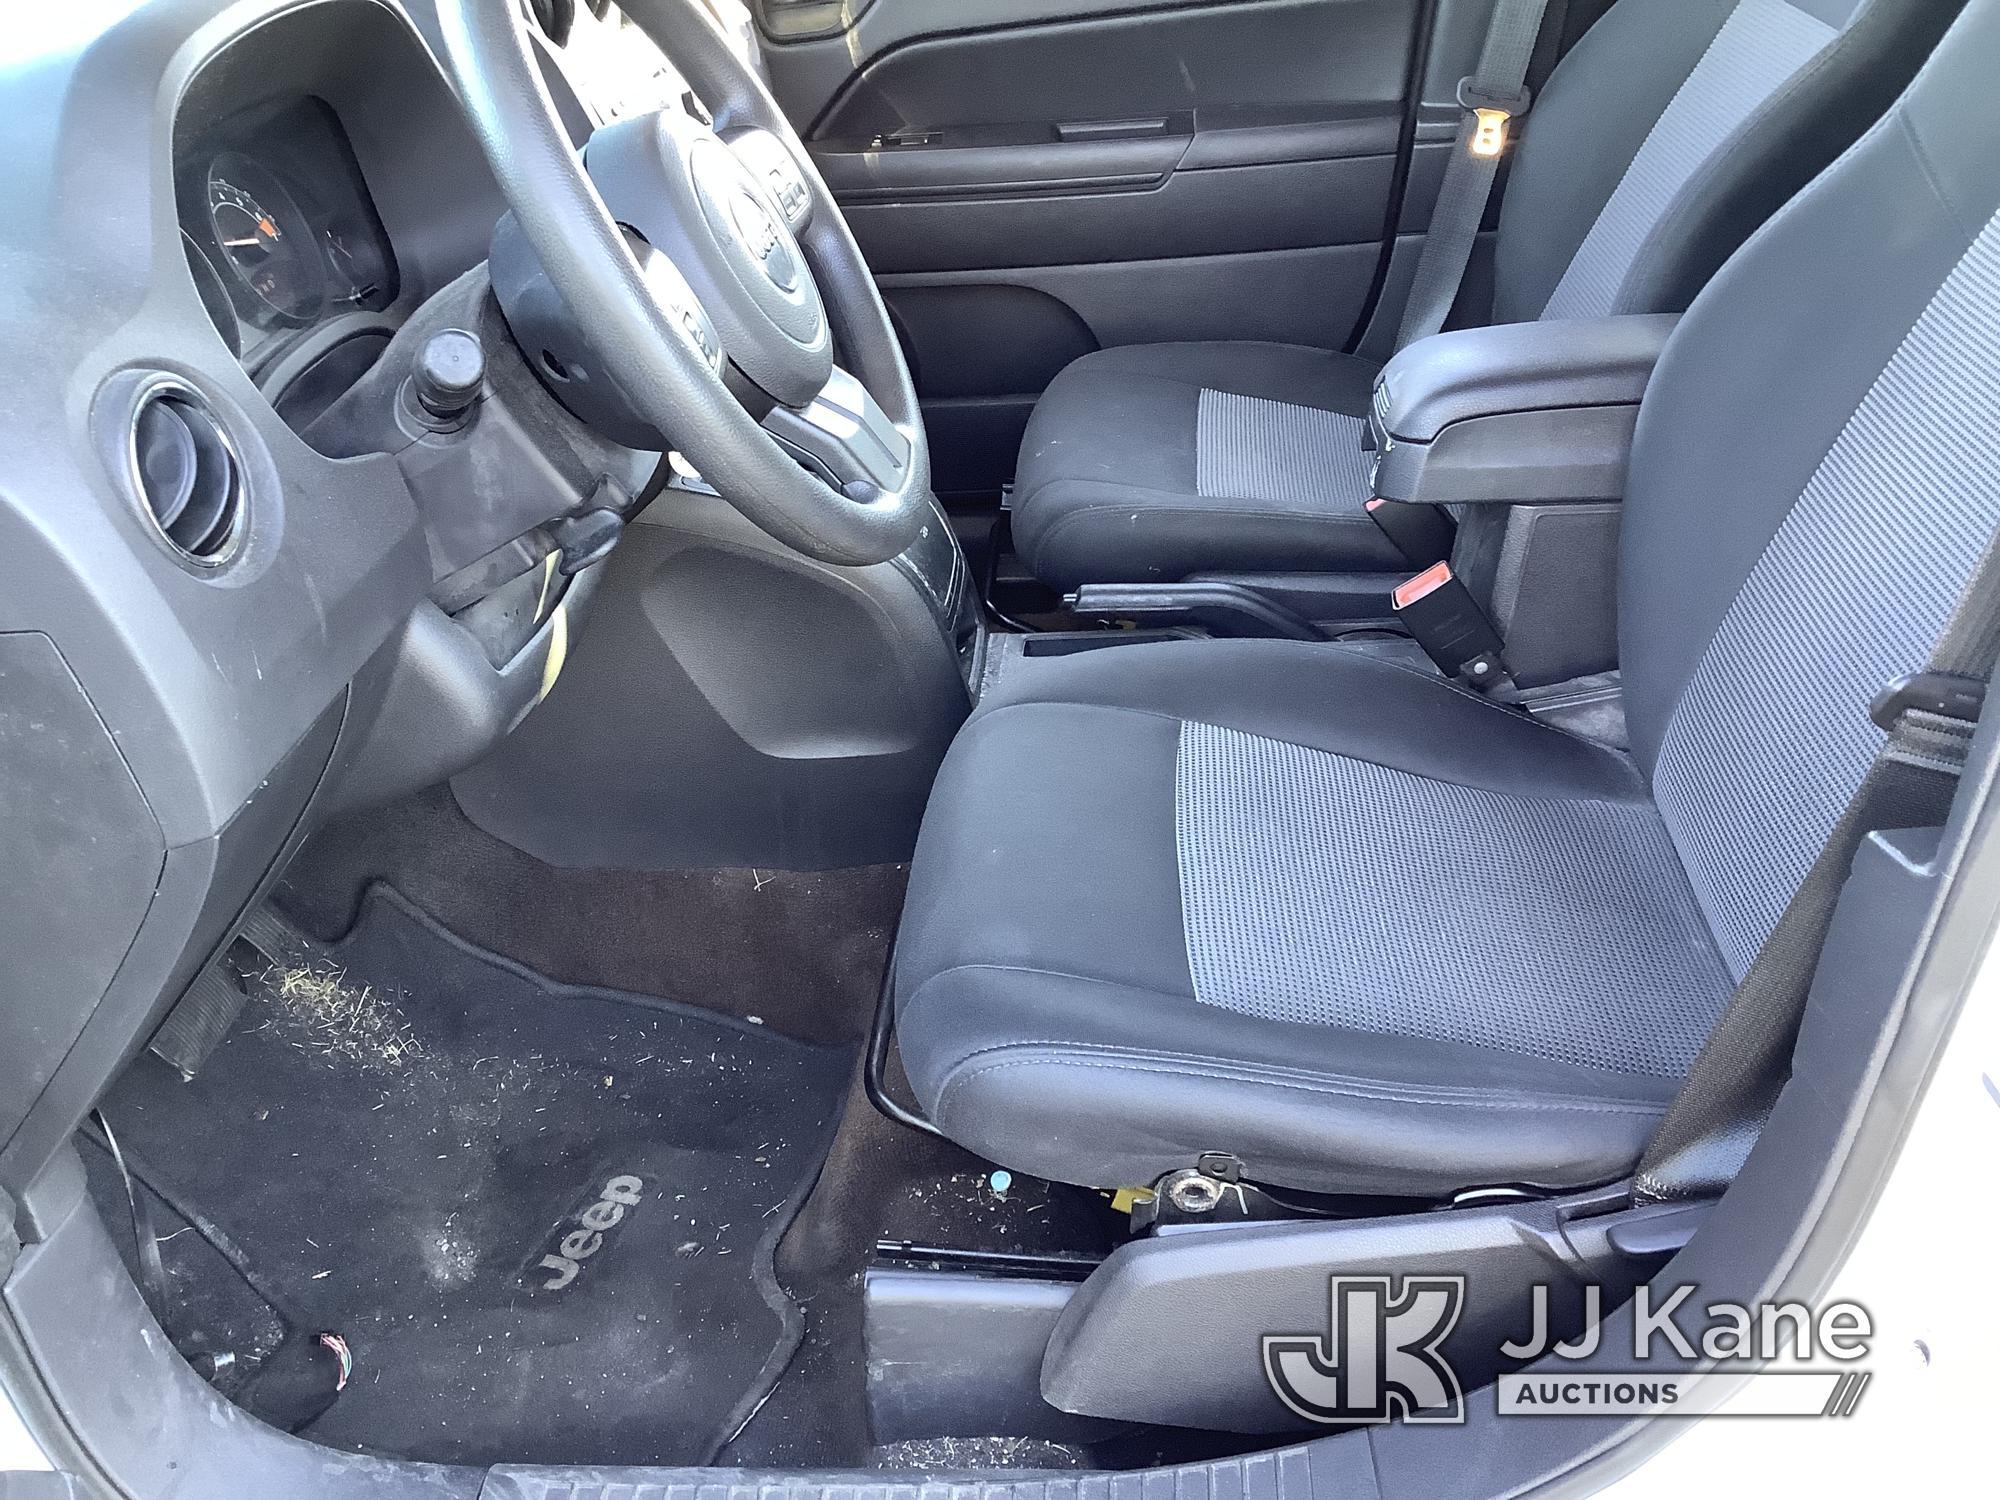 (Chester Springs, PA) 2014 Jeep Patriot 4-Door Sport Utility Vehicle Runs & Moves, Body & Rust Damag